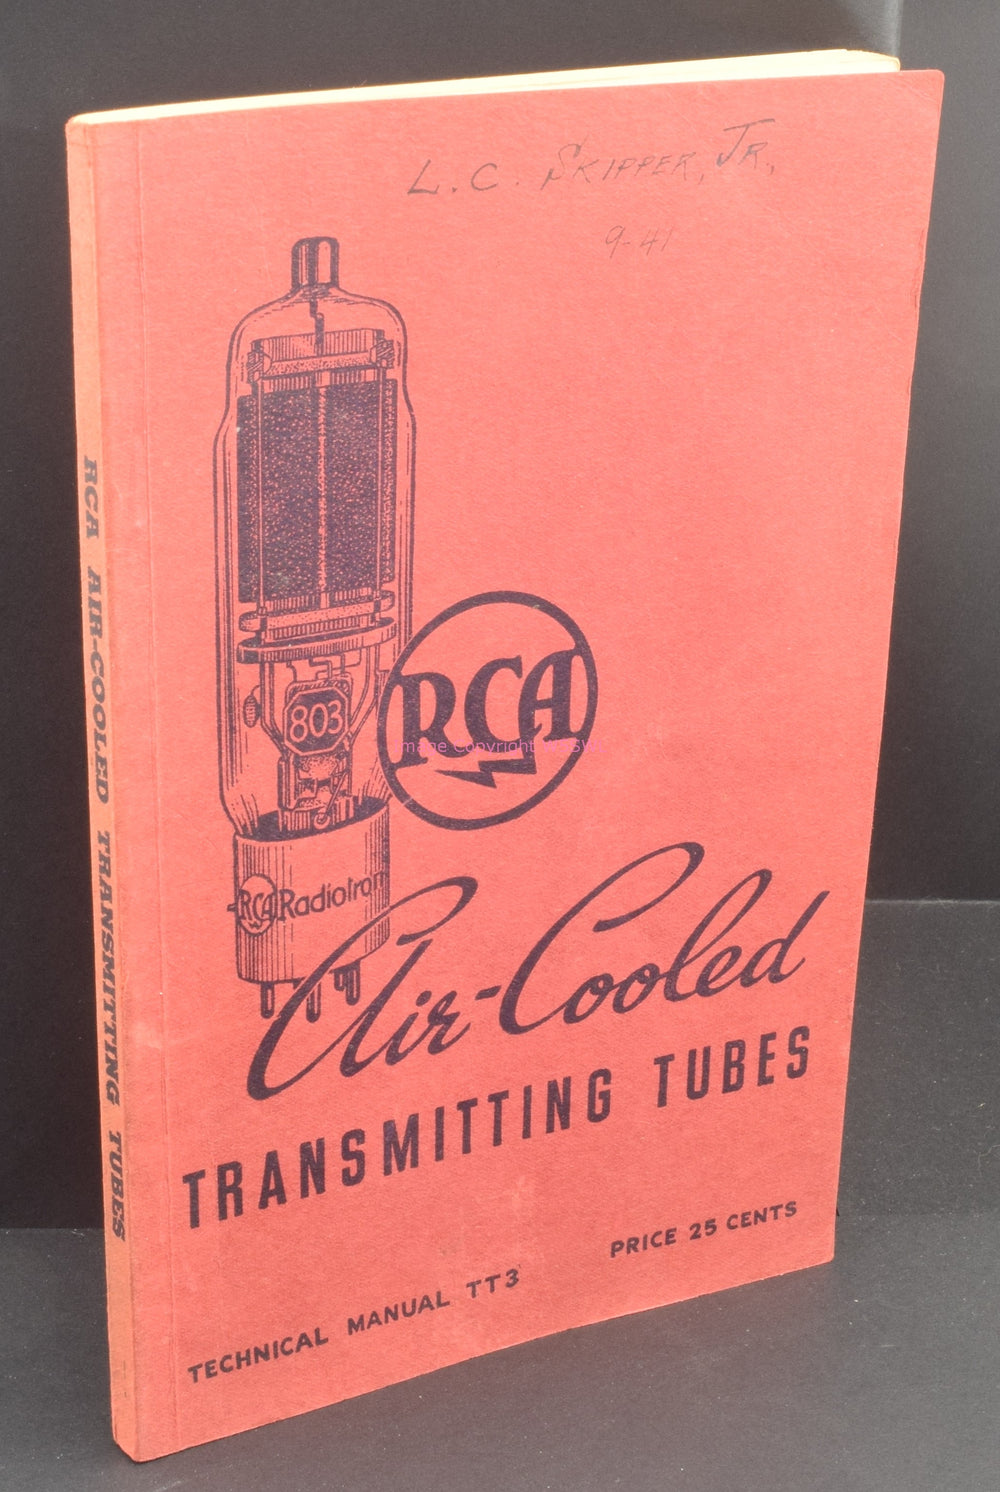 RCA Air-Cooled Transmitting Tubes Technical Manual TT3 - Dave's Hobby Shop by W5SWL